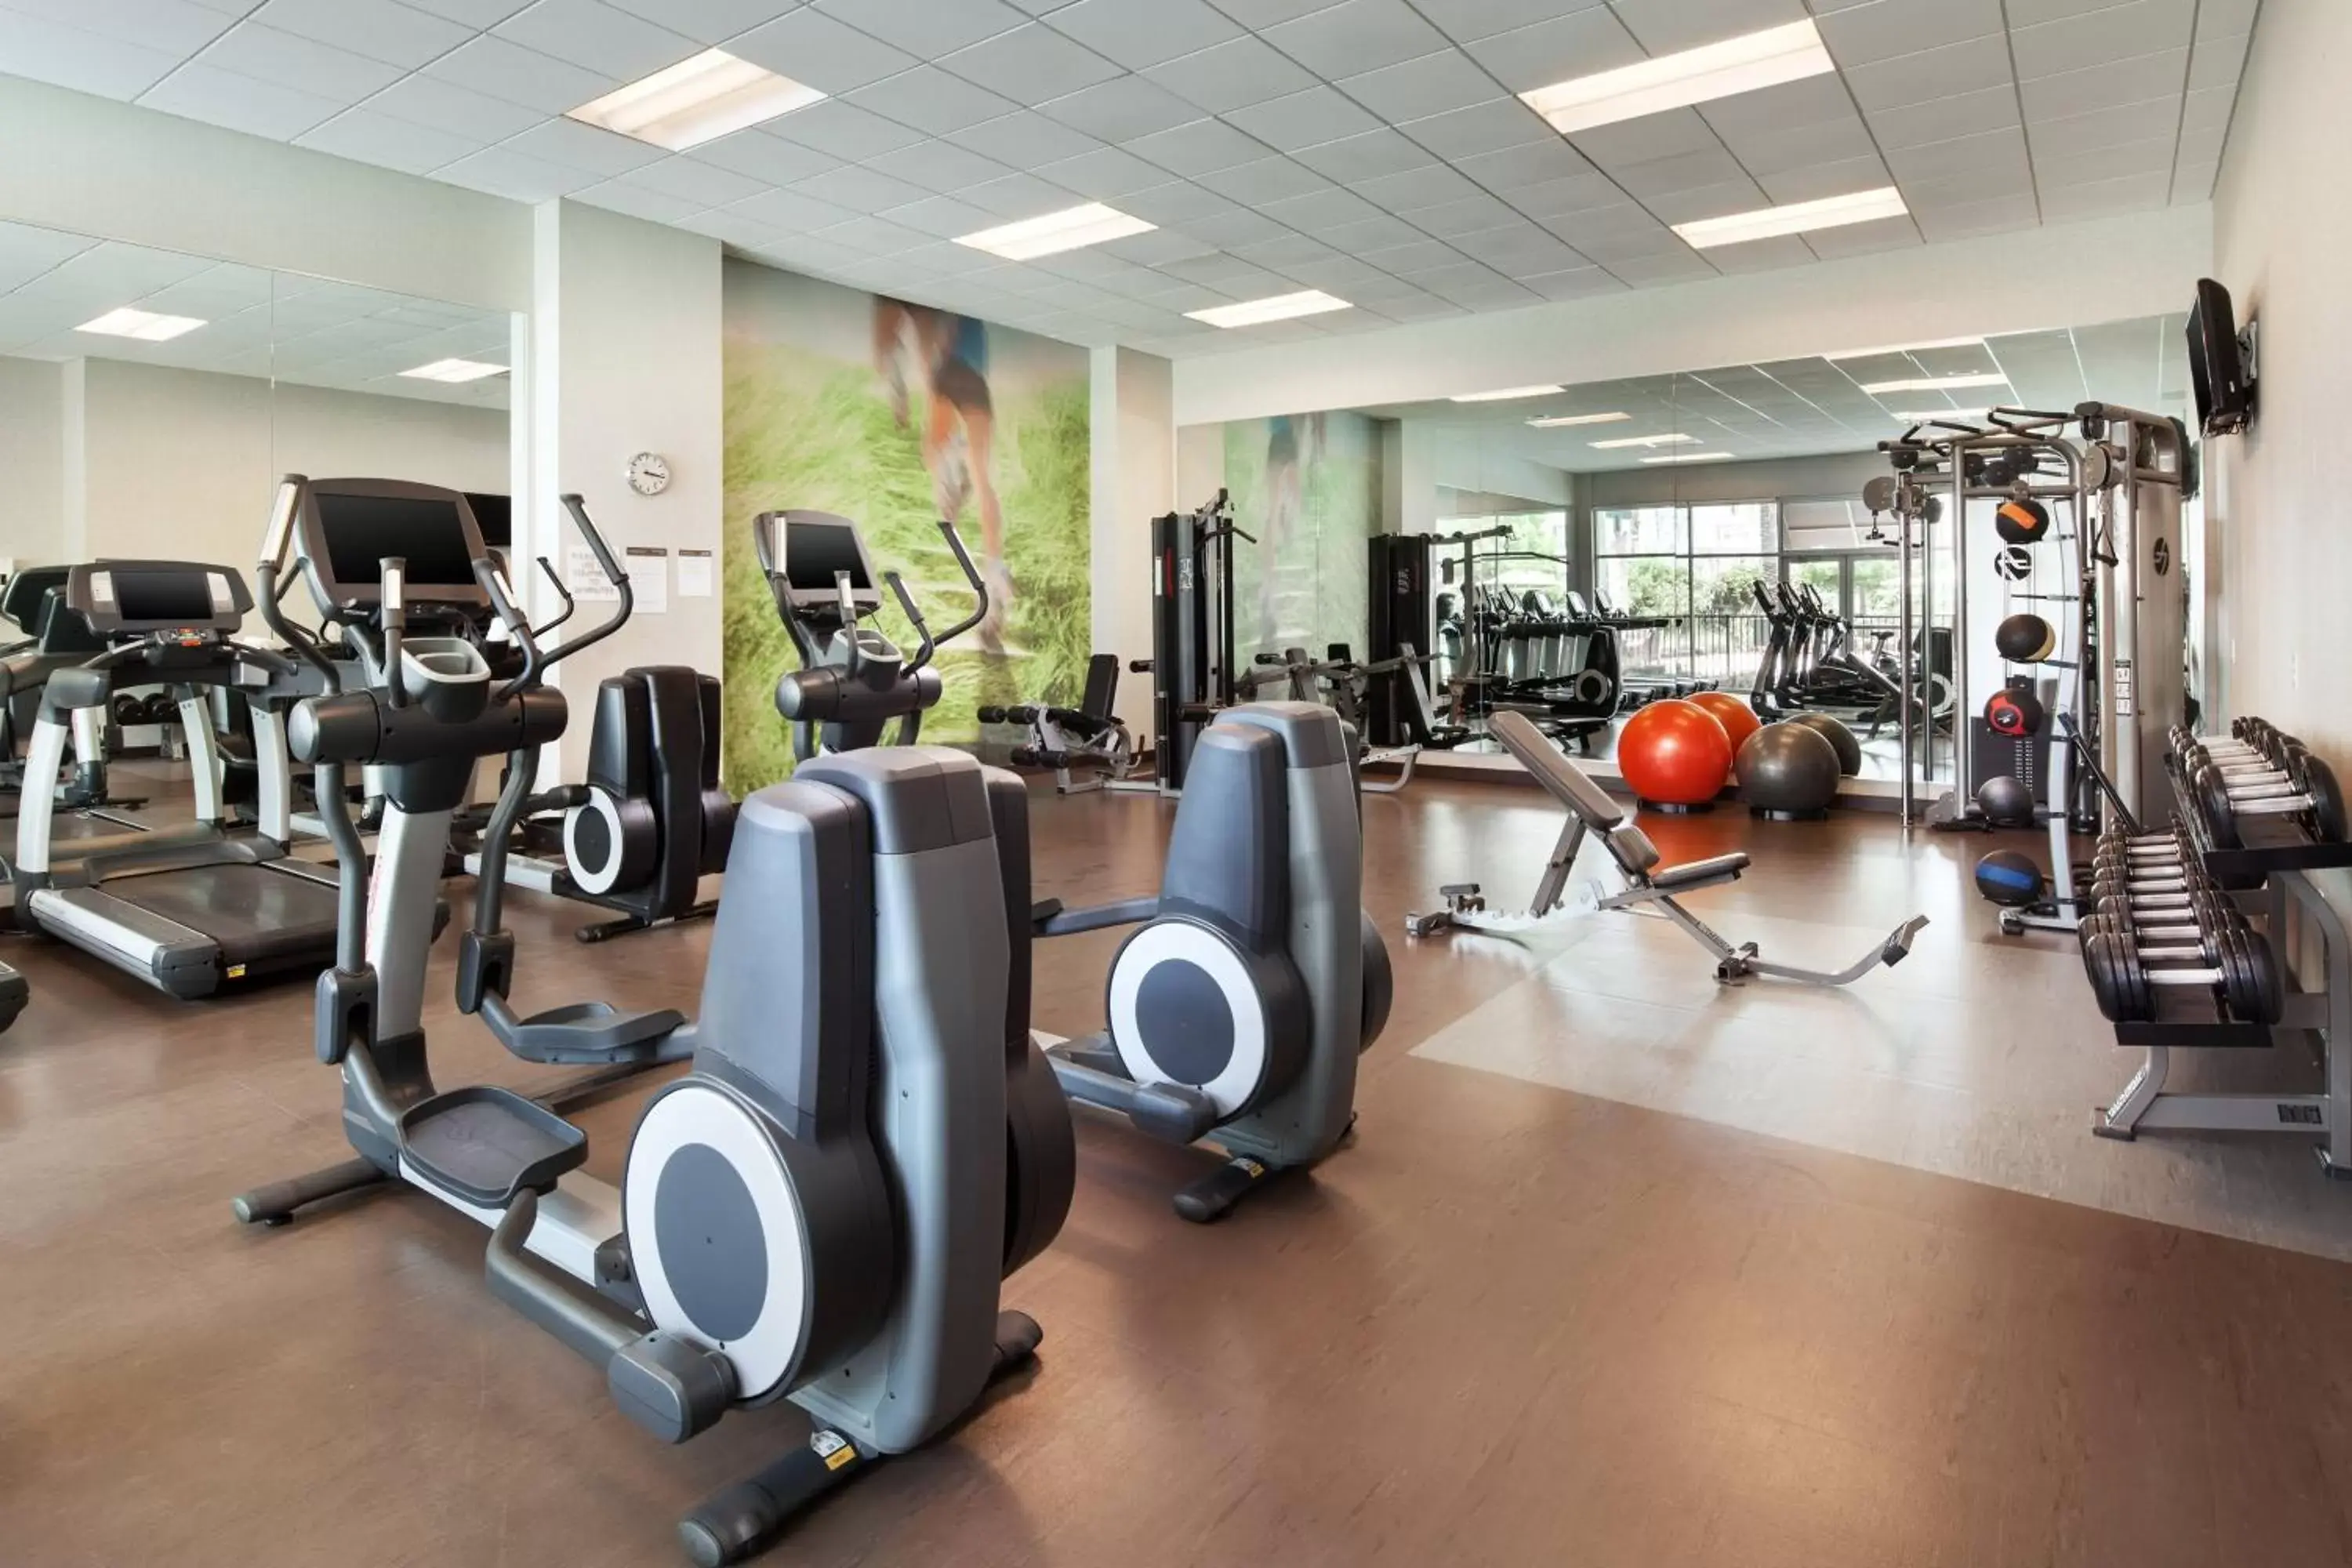 Fitness centre/facilities, Fitness Center/Facilities in The Westin Austin at The Domain